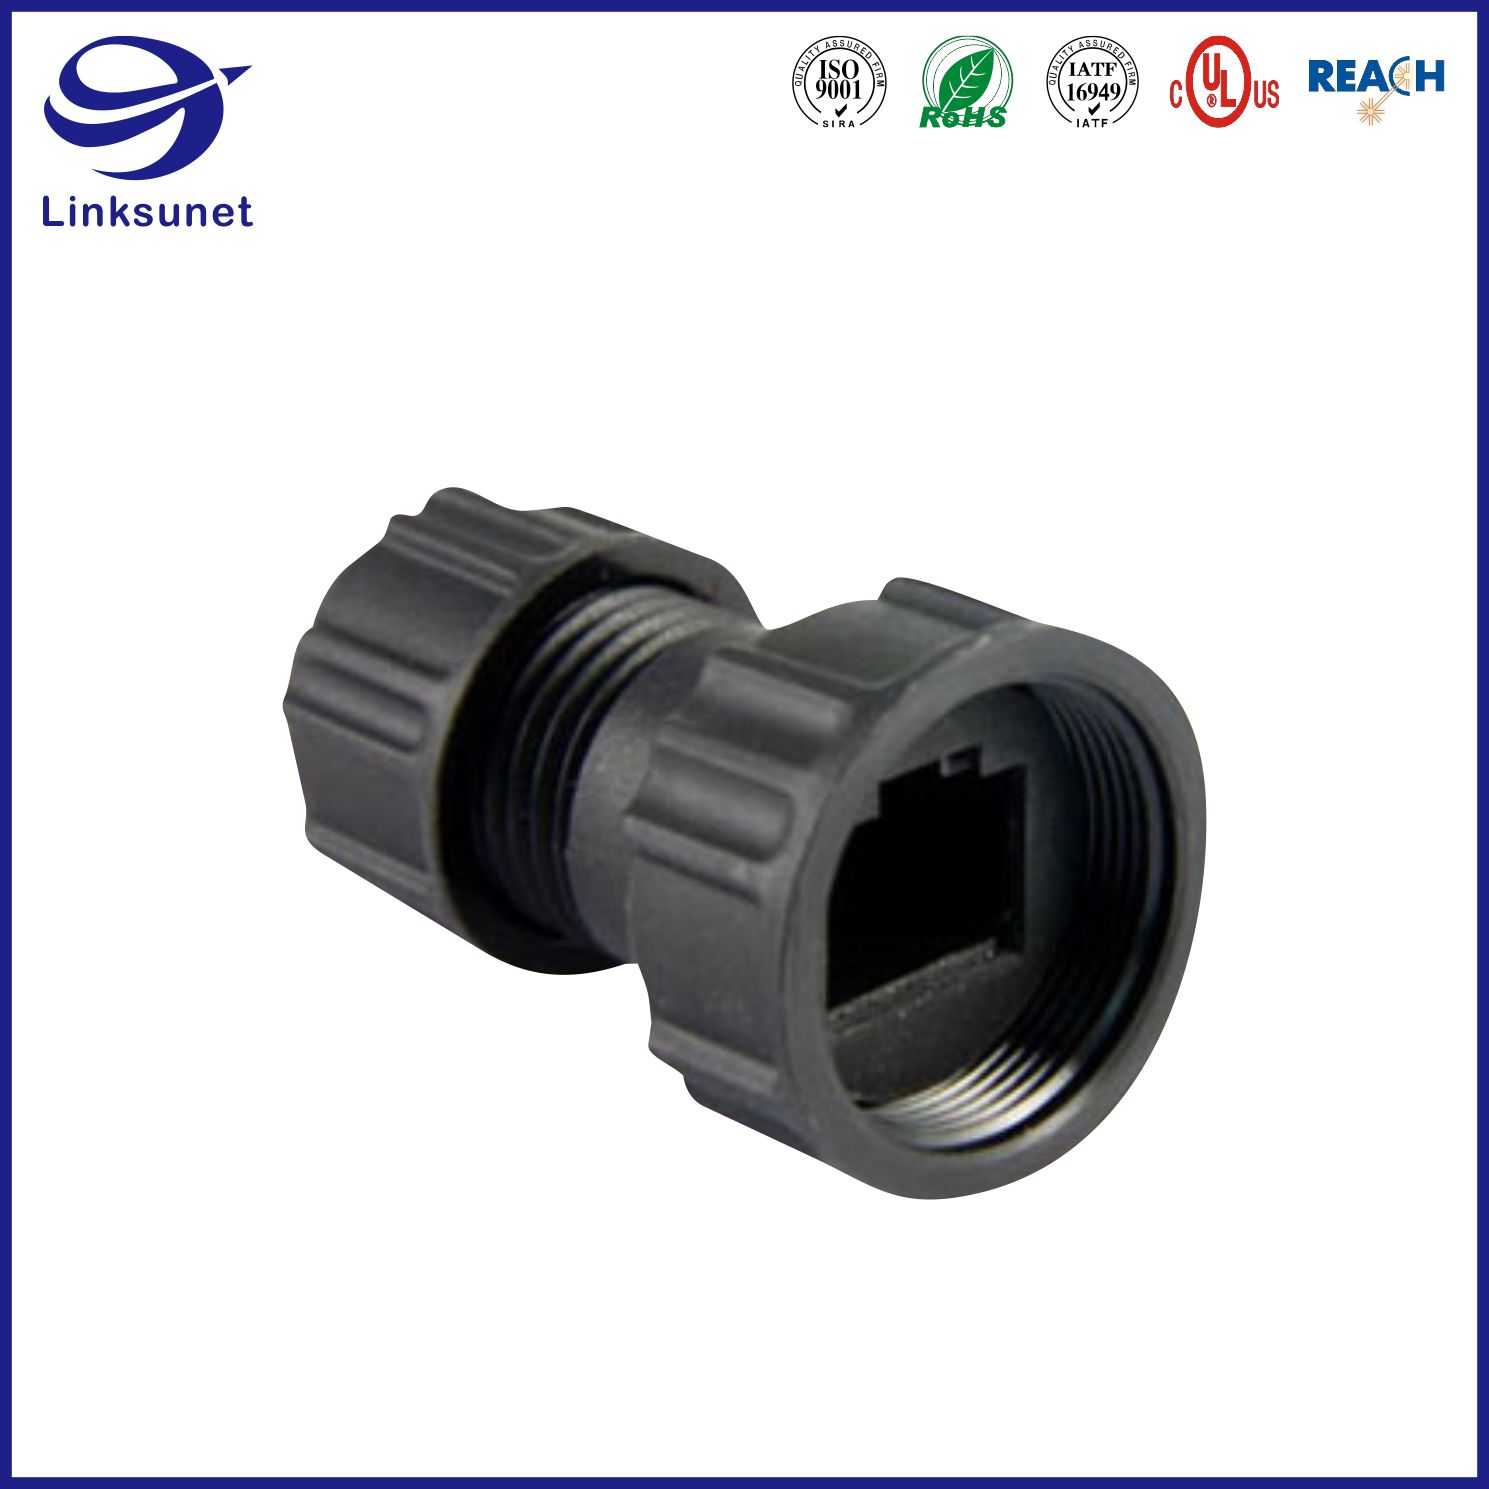 RJ45 Series Led Waterproof Connector For Industrial Wire Harness